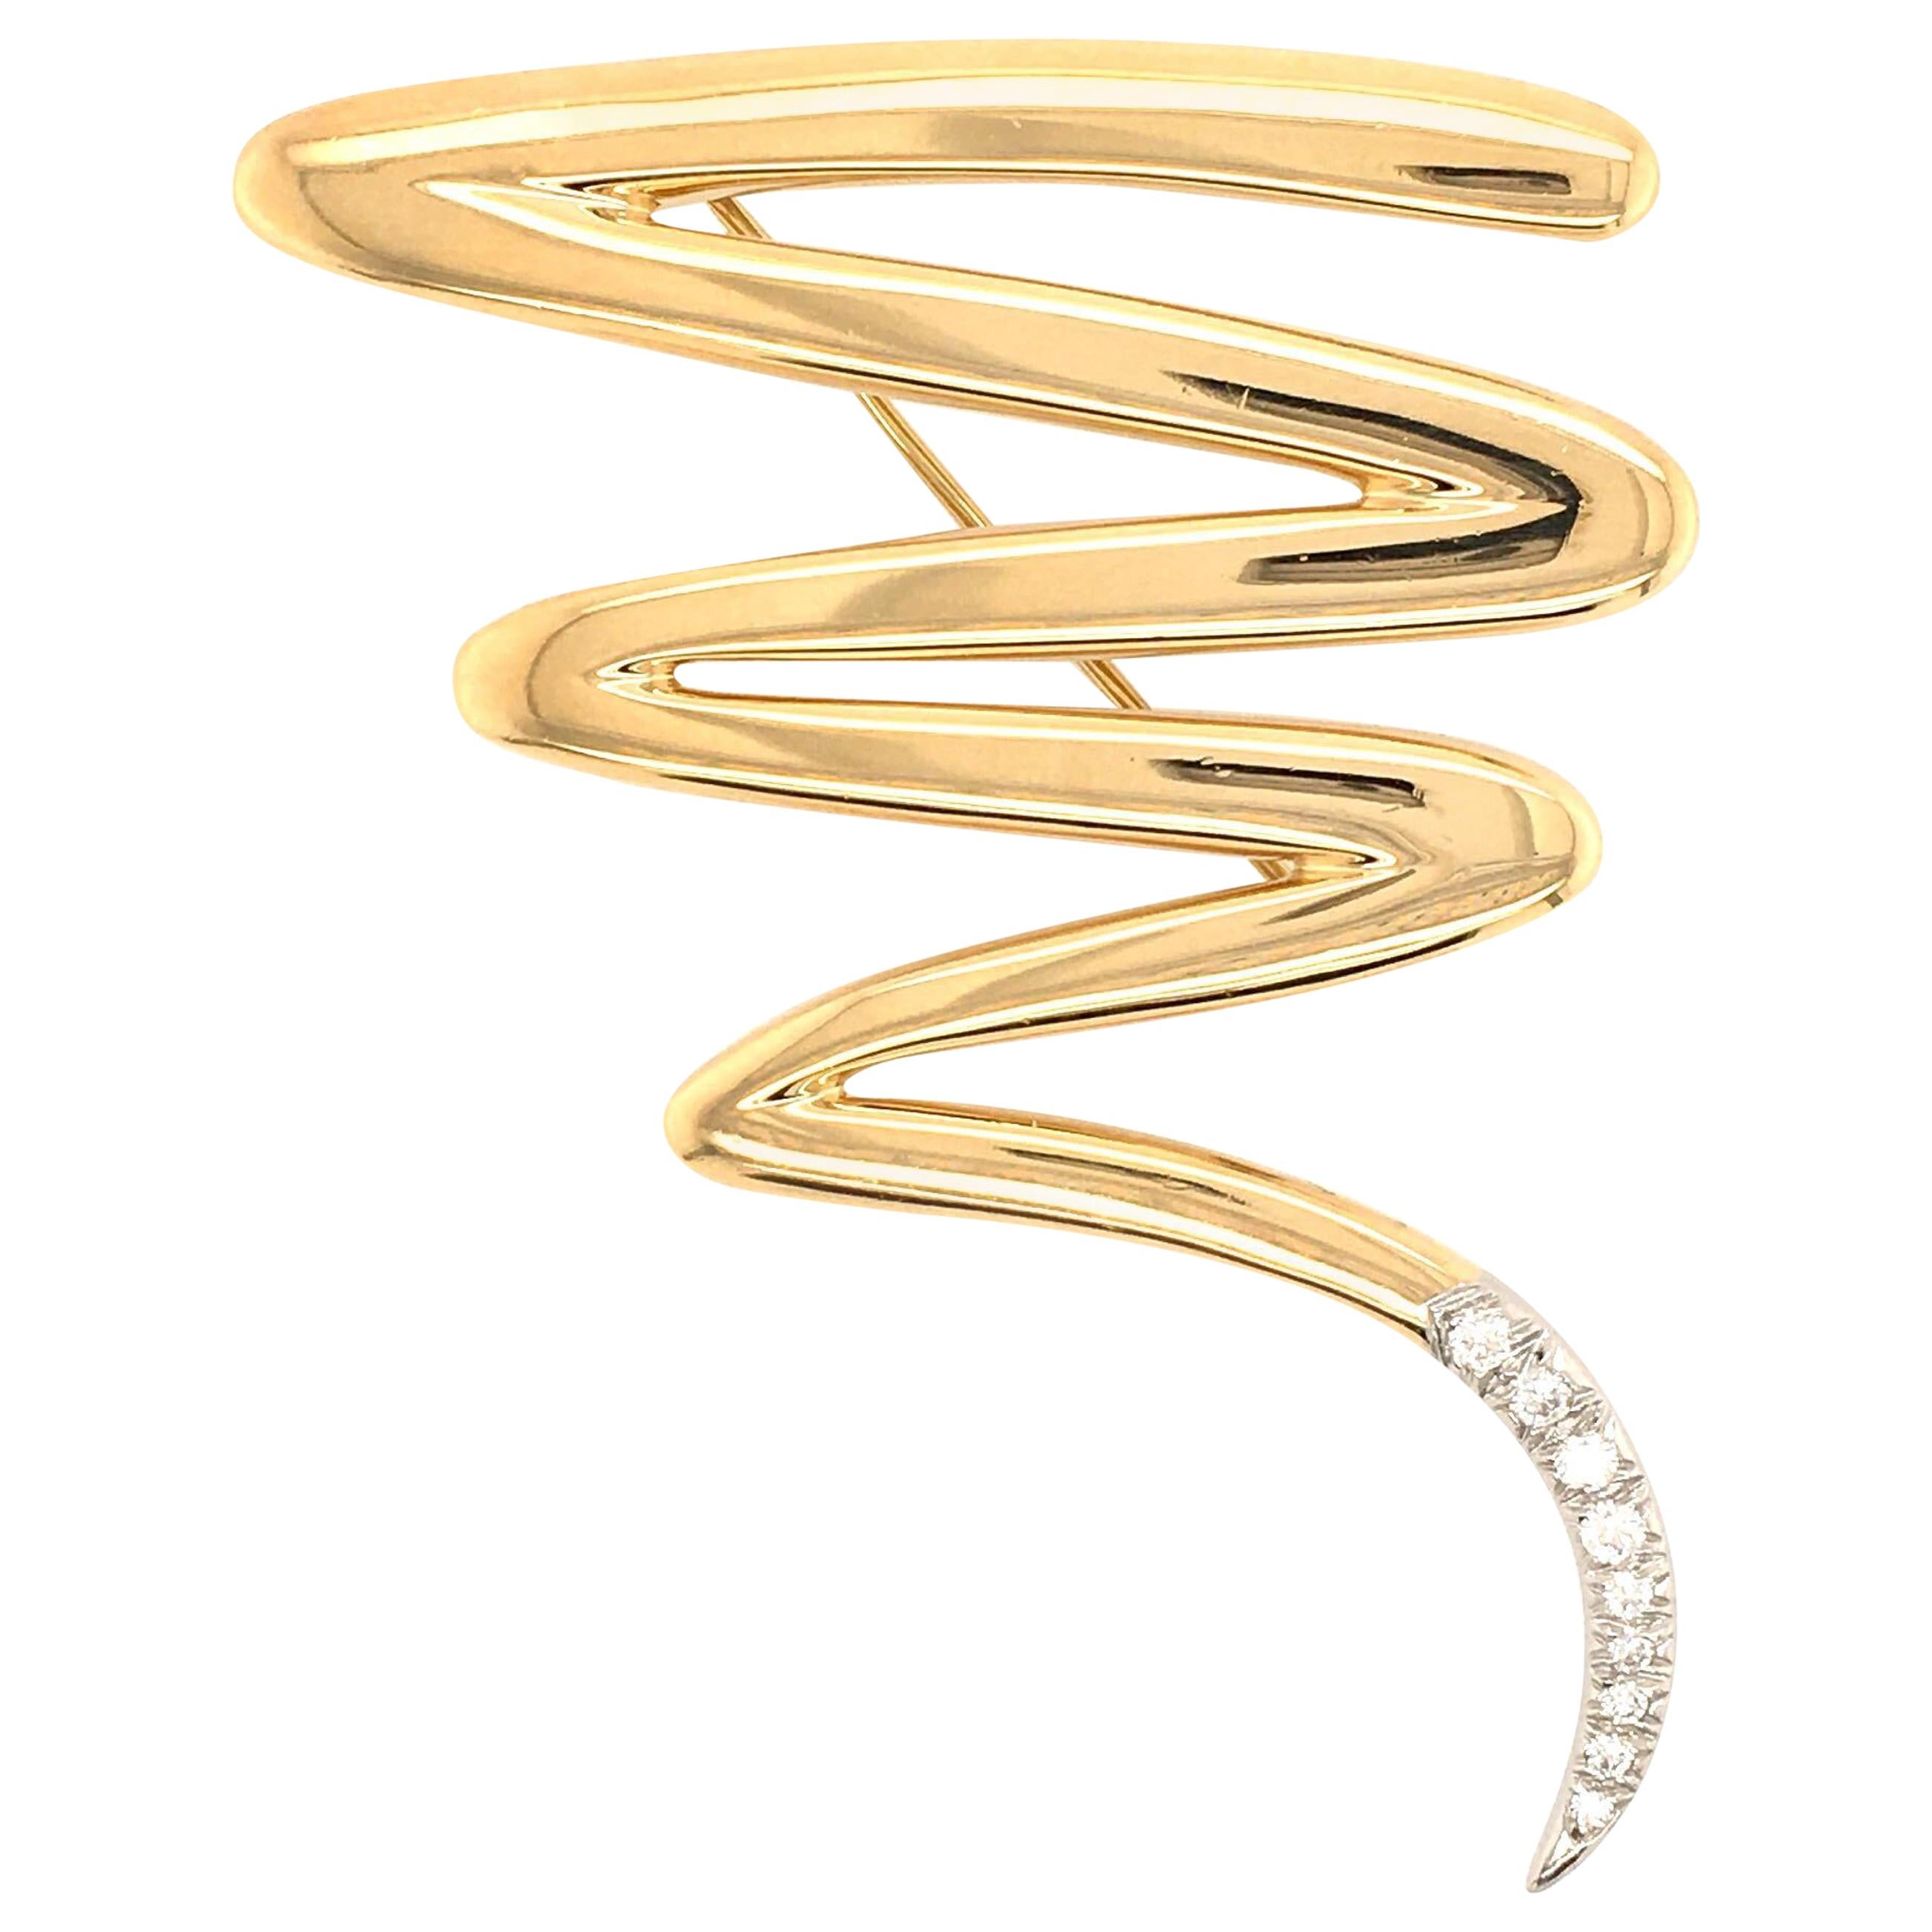 Paloma Picasso for Tiffany & Co., Gold and Diamond Squiggle Brooch